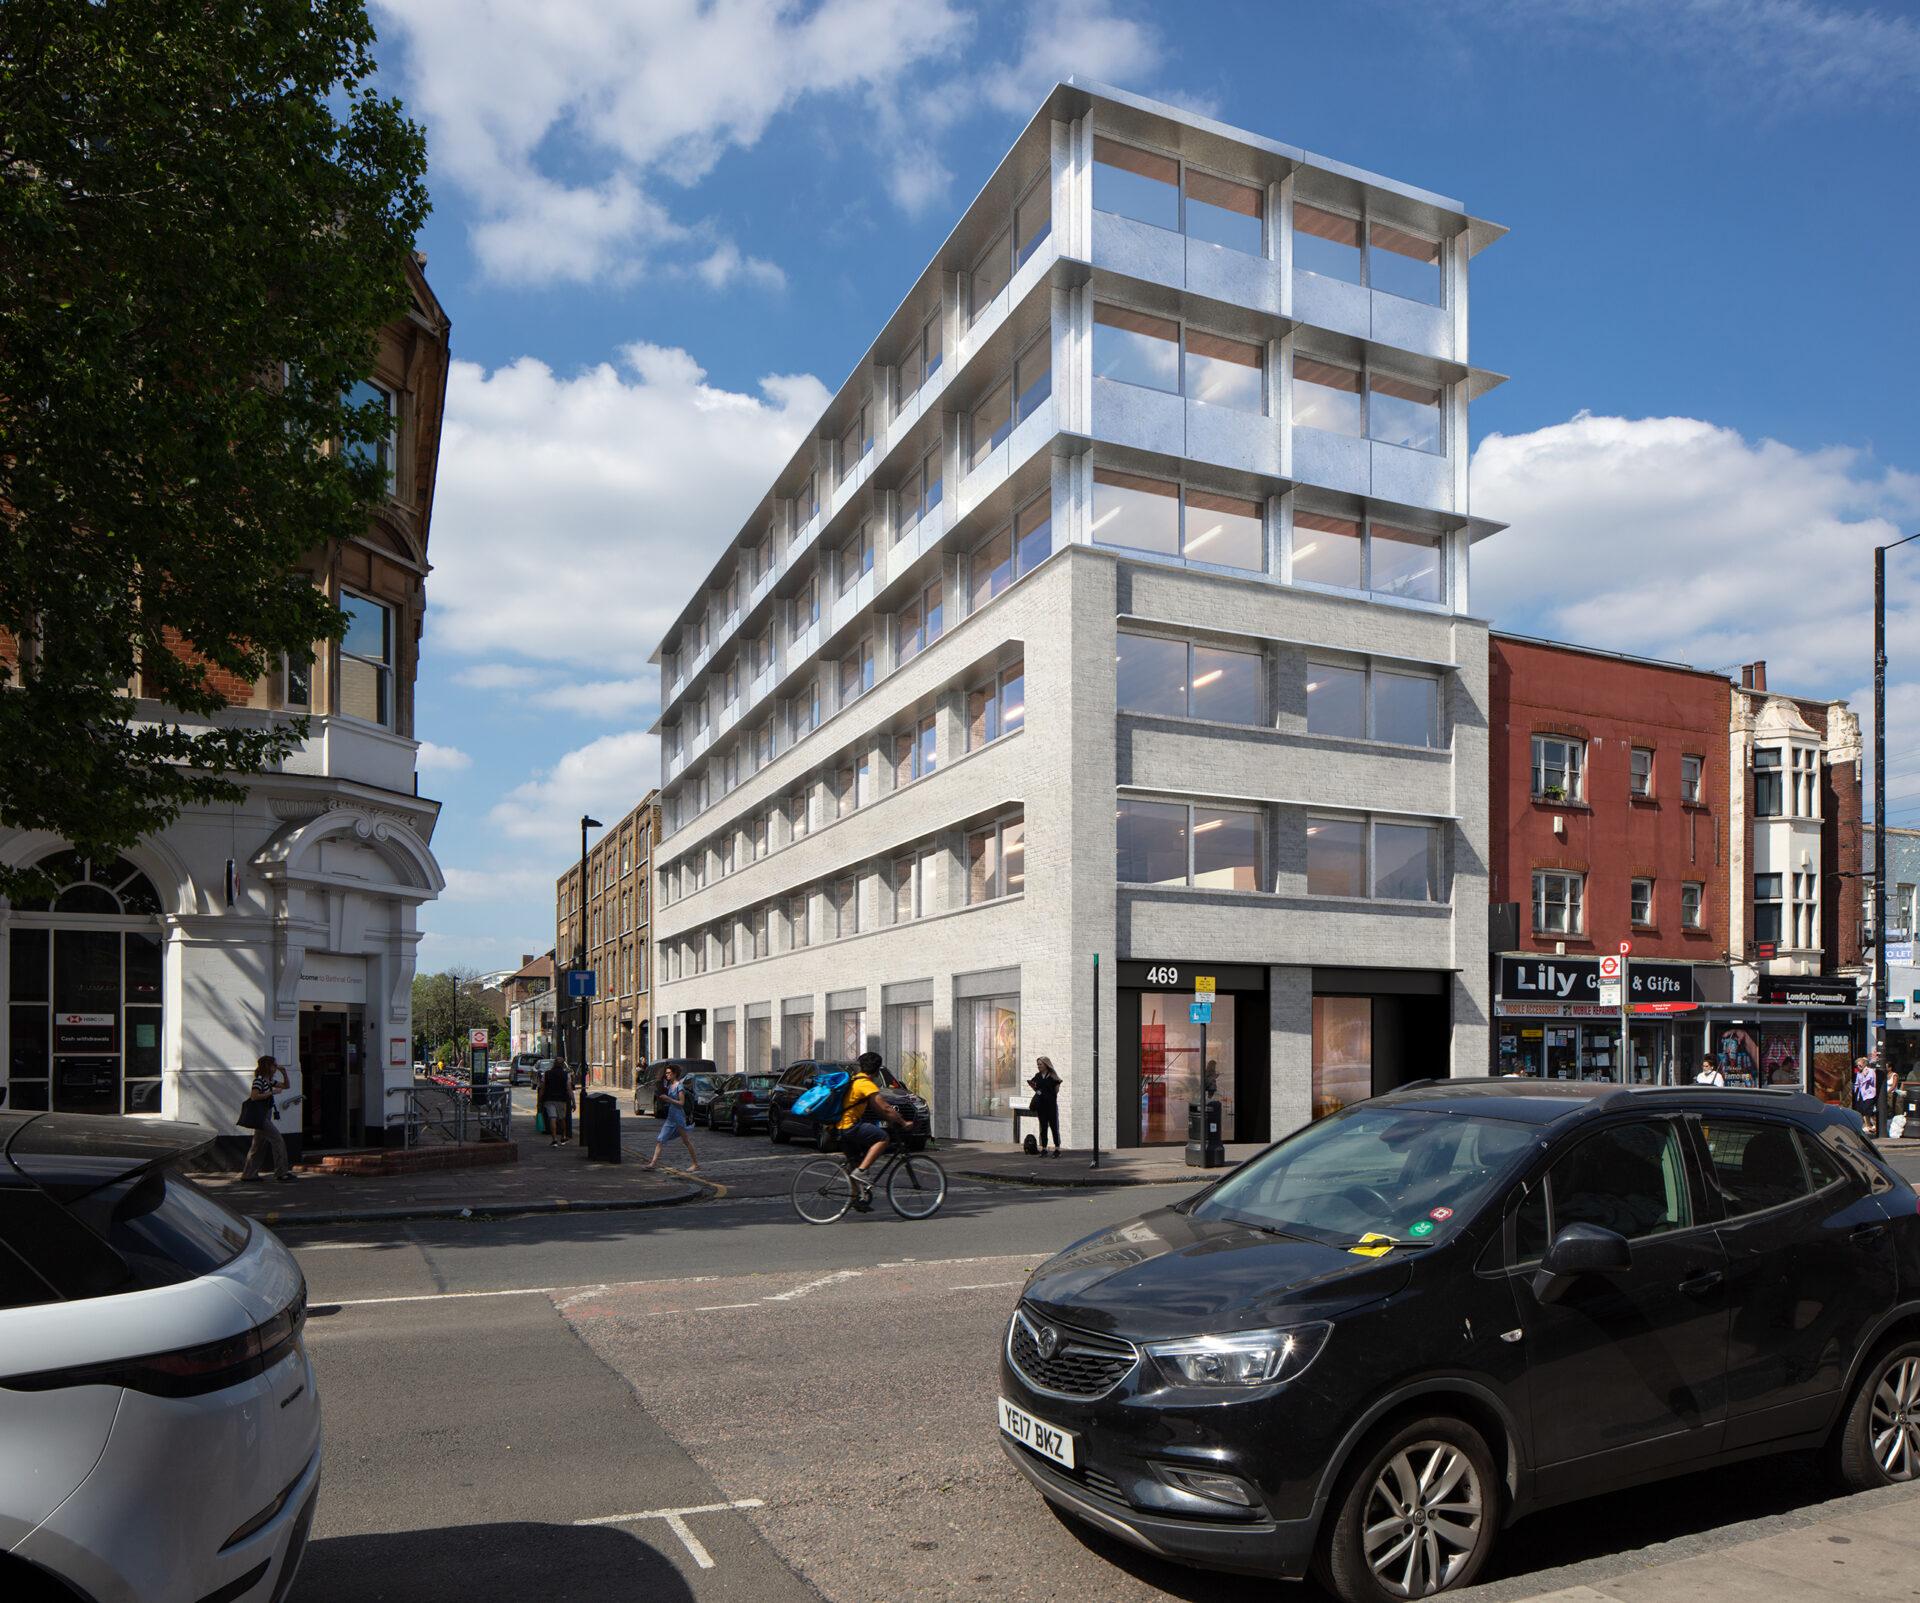 Unity Real Estate begin construction to add Grade A office and retail space to Bethnal Green